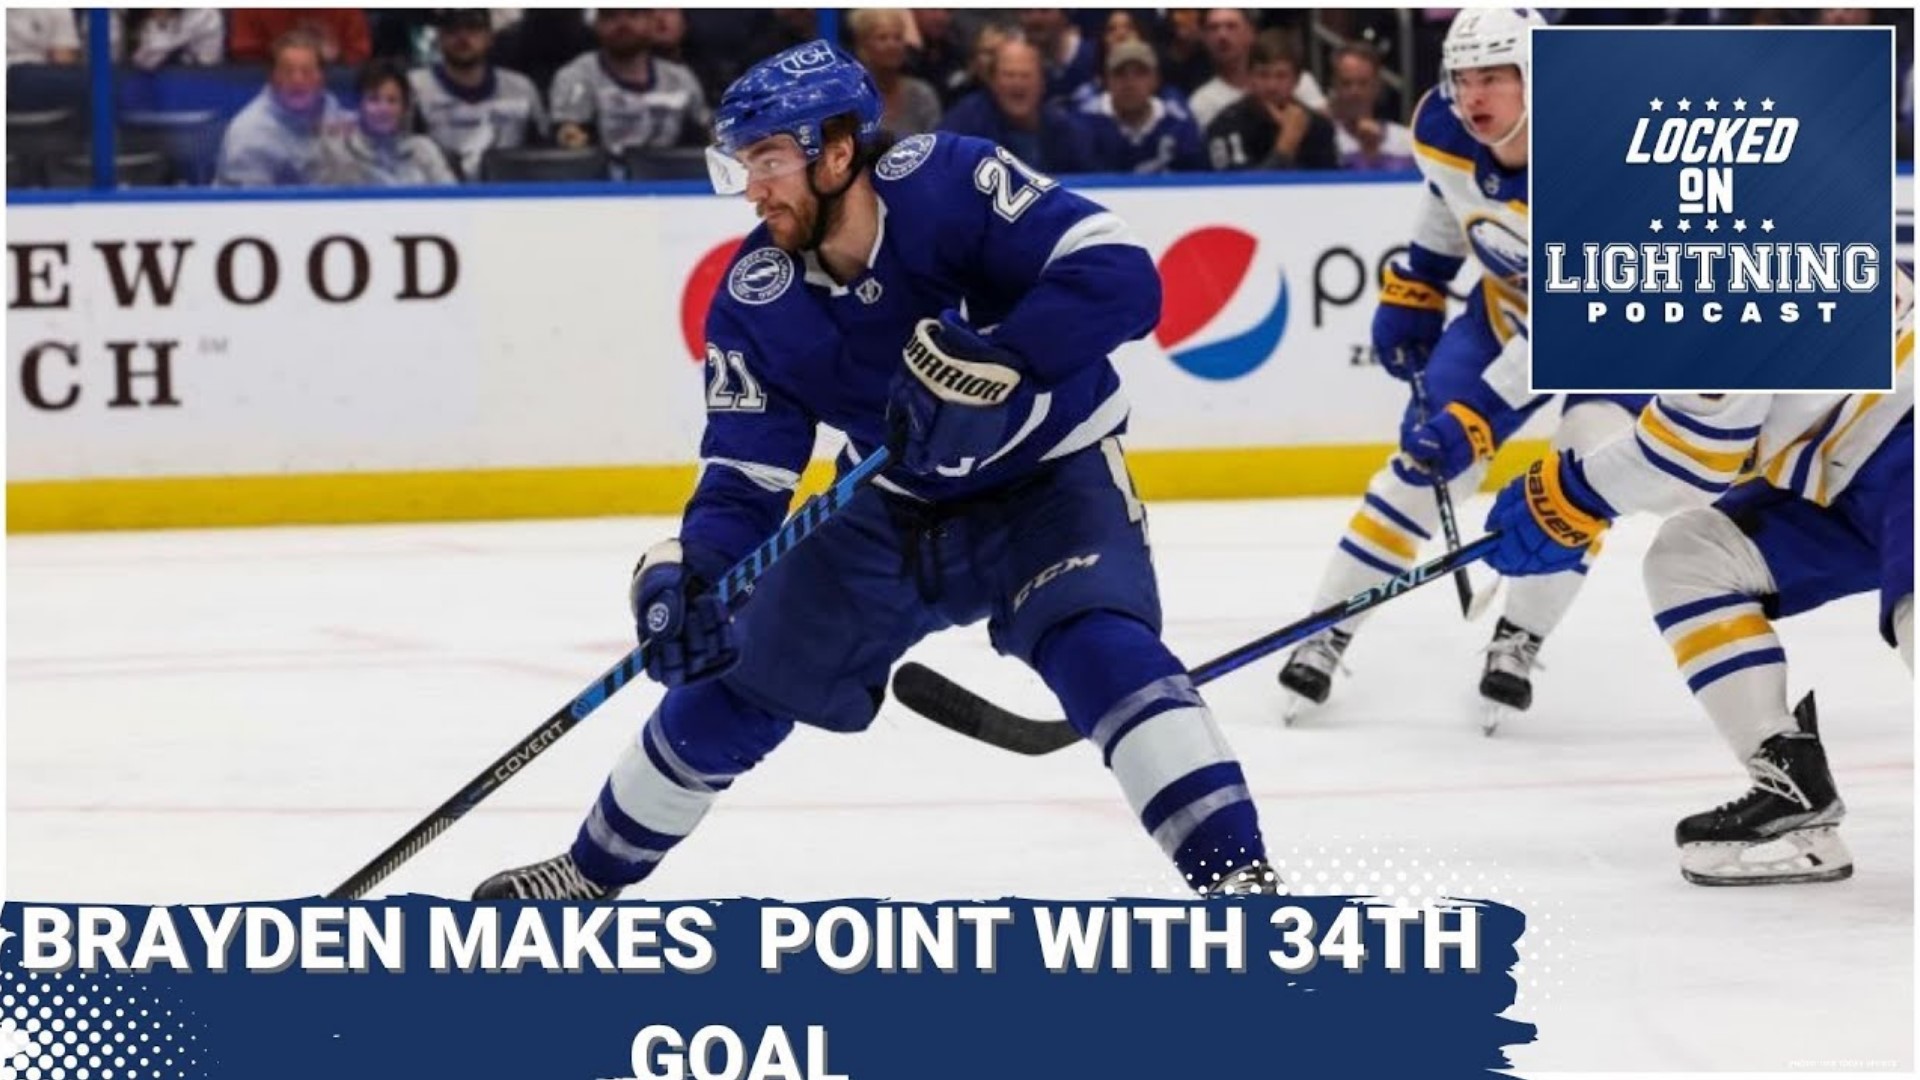 We marvel once again at the nightly performance of Brayden Point. Point was the highlight for the Lightning with a breakaway goal to notch his 34th of the season.